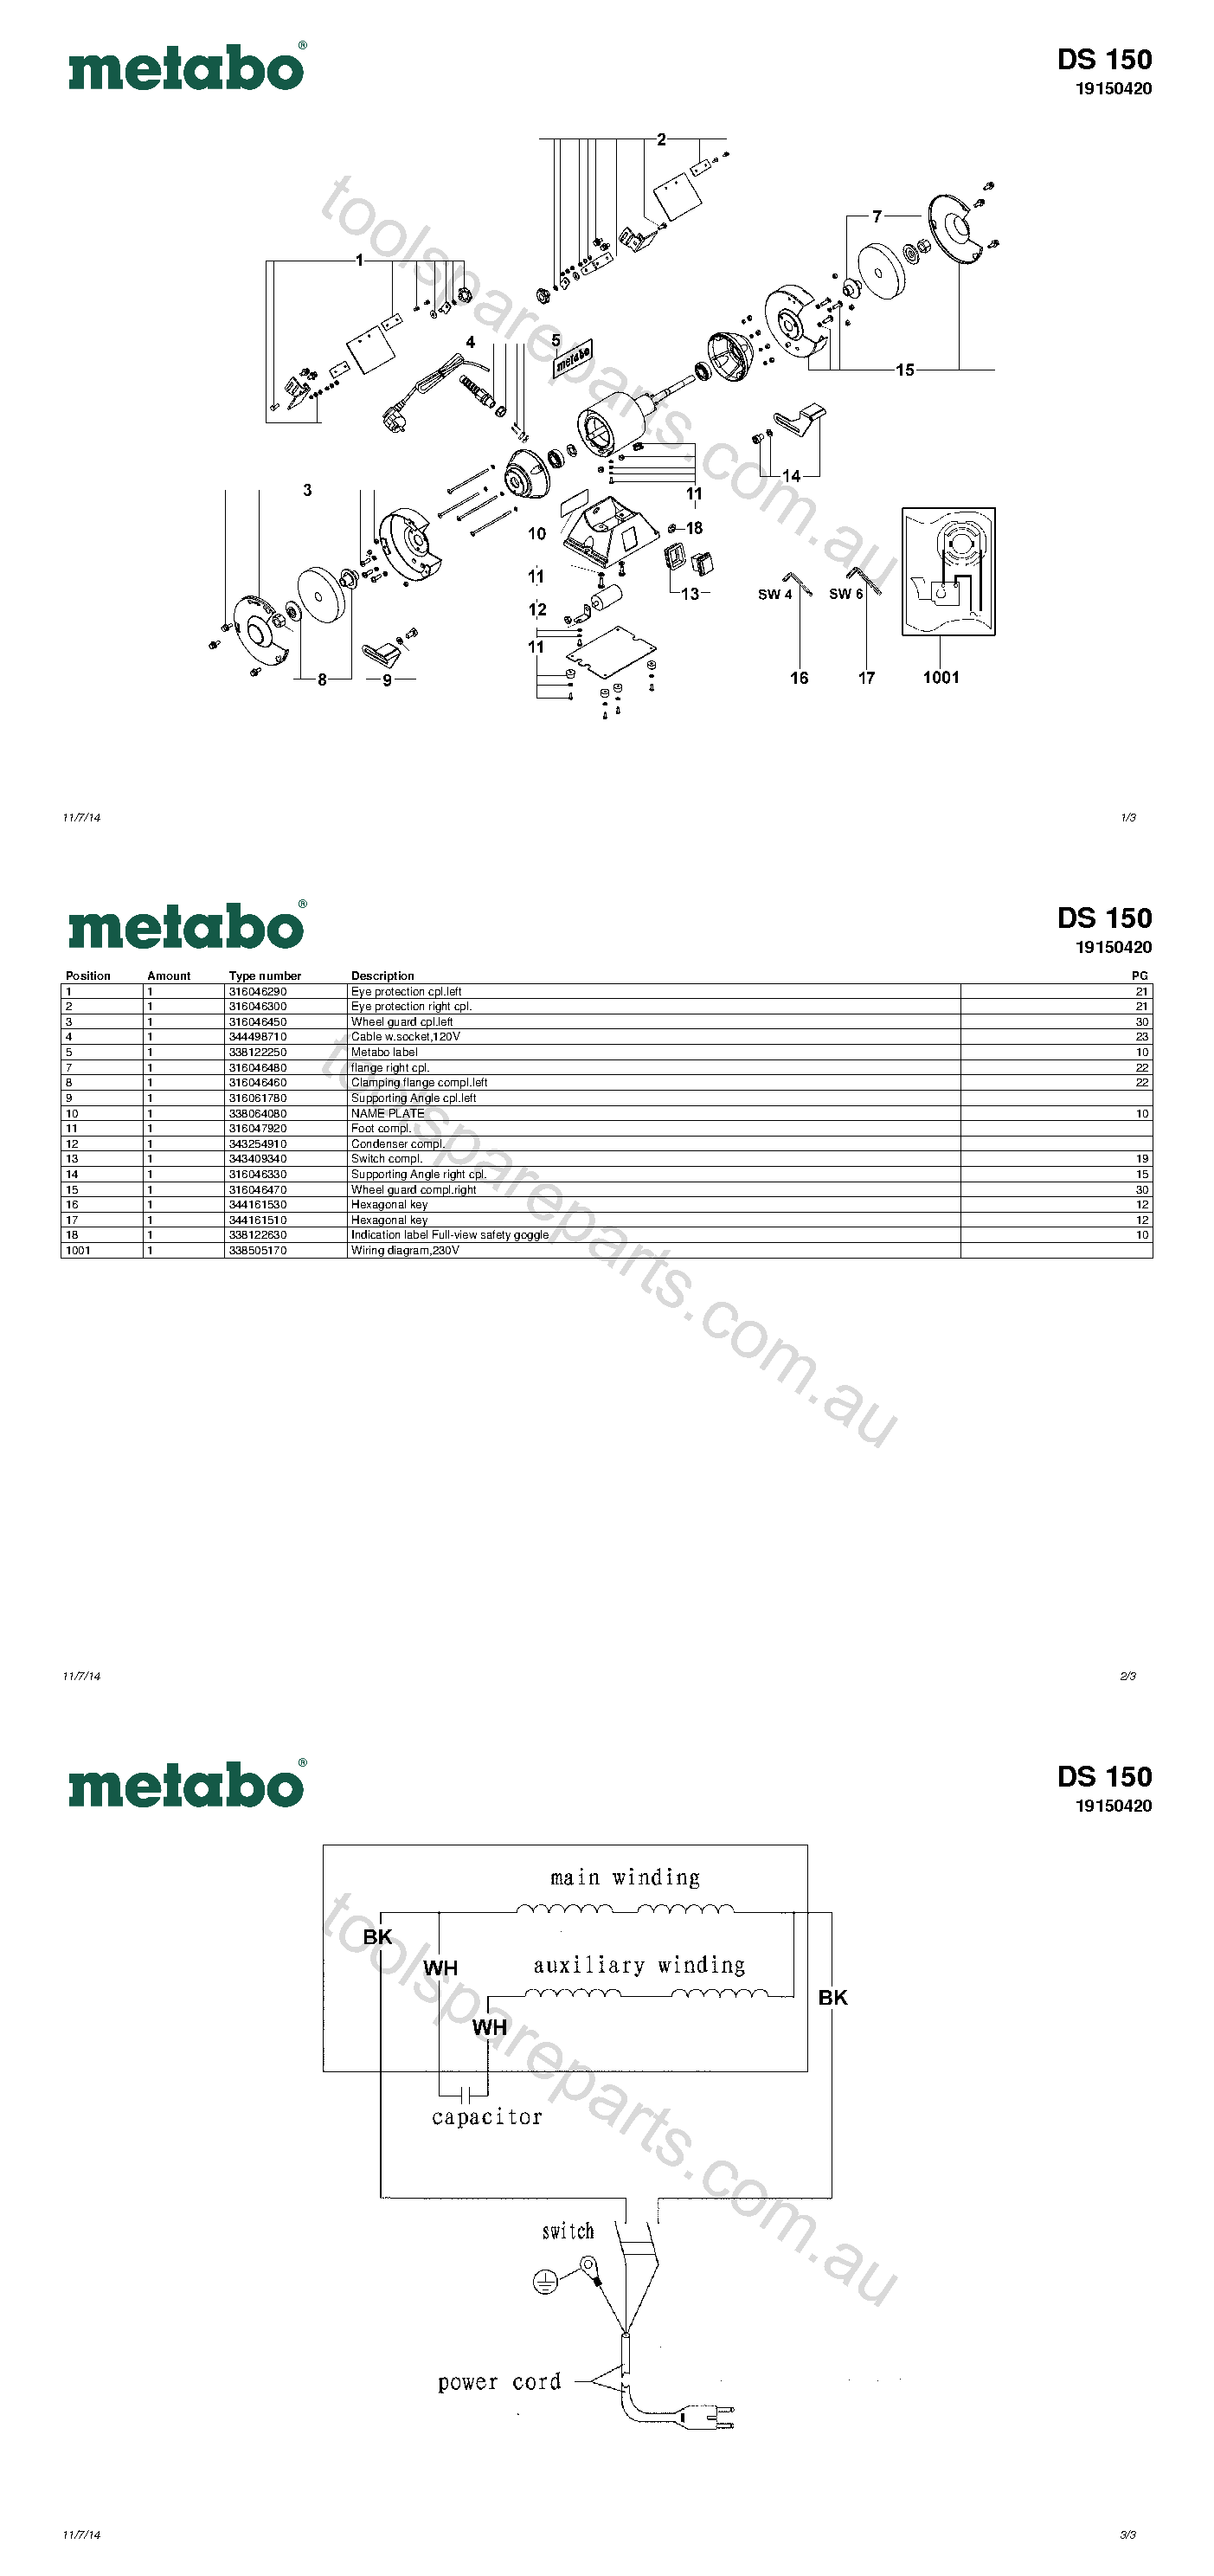 Metabo DS 150 19150420  Diagram 1